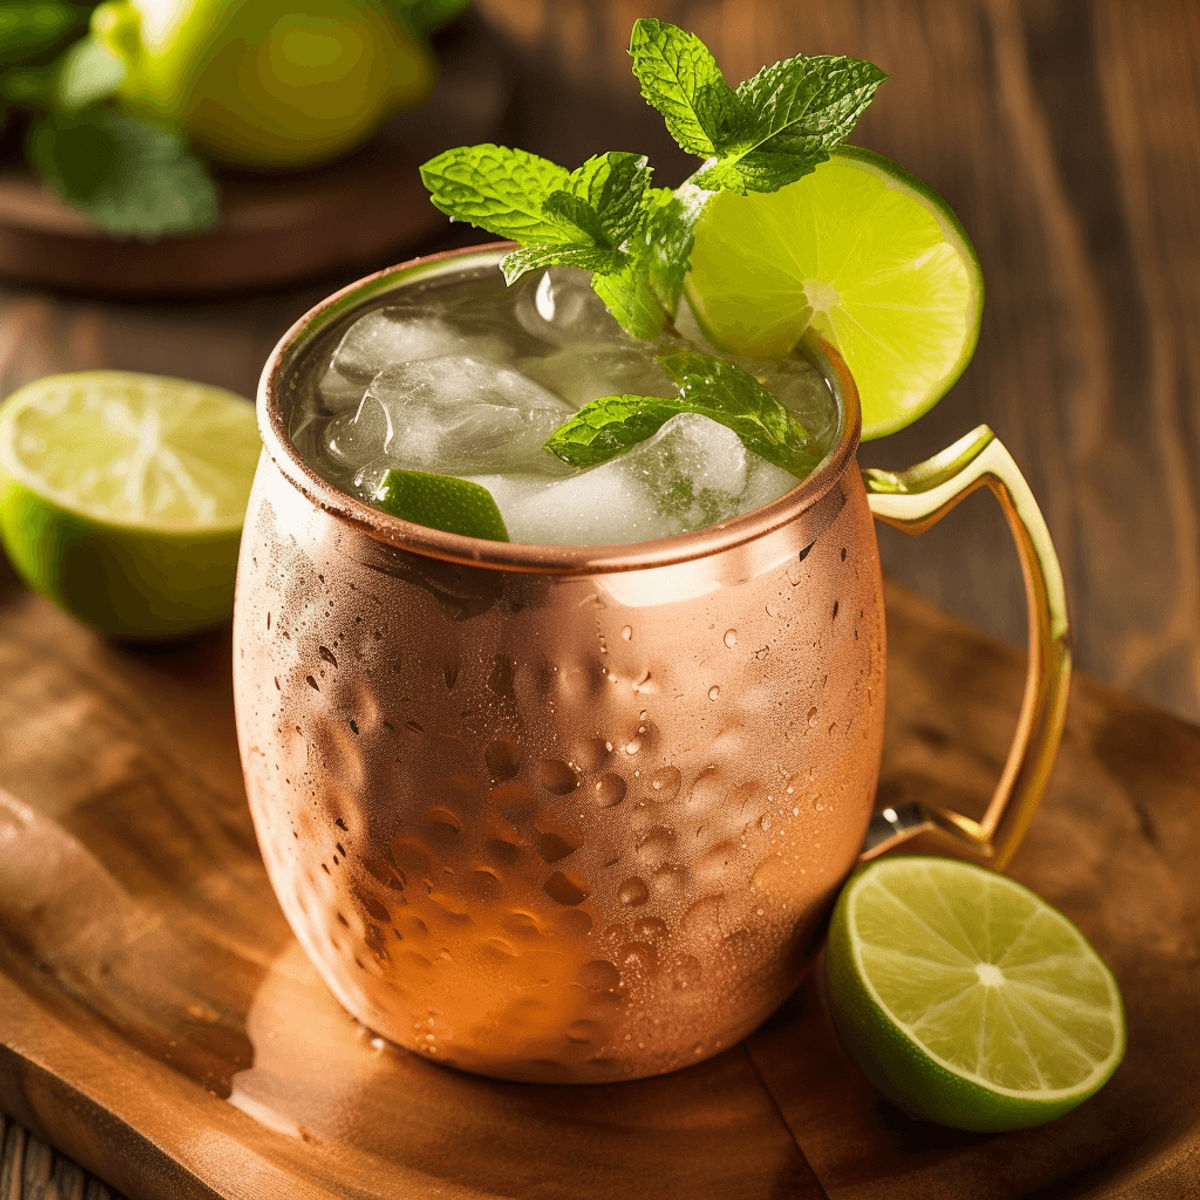 Moscow Mule Recipe: How to Make It